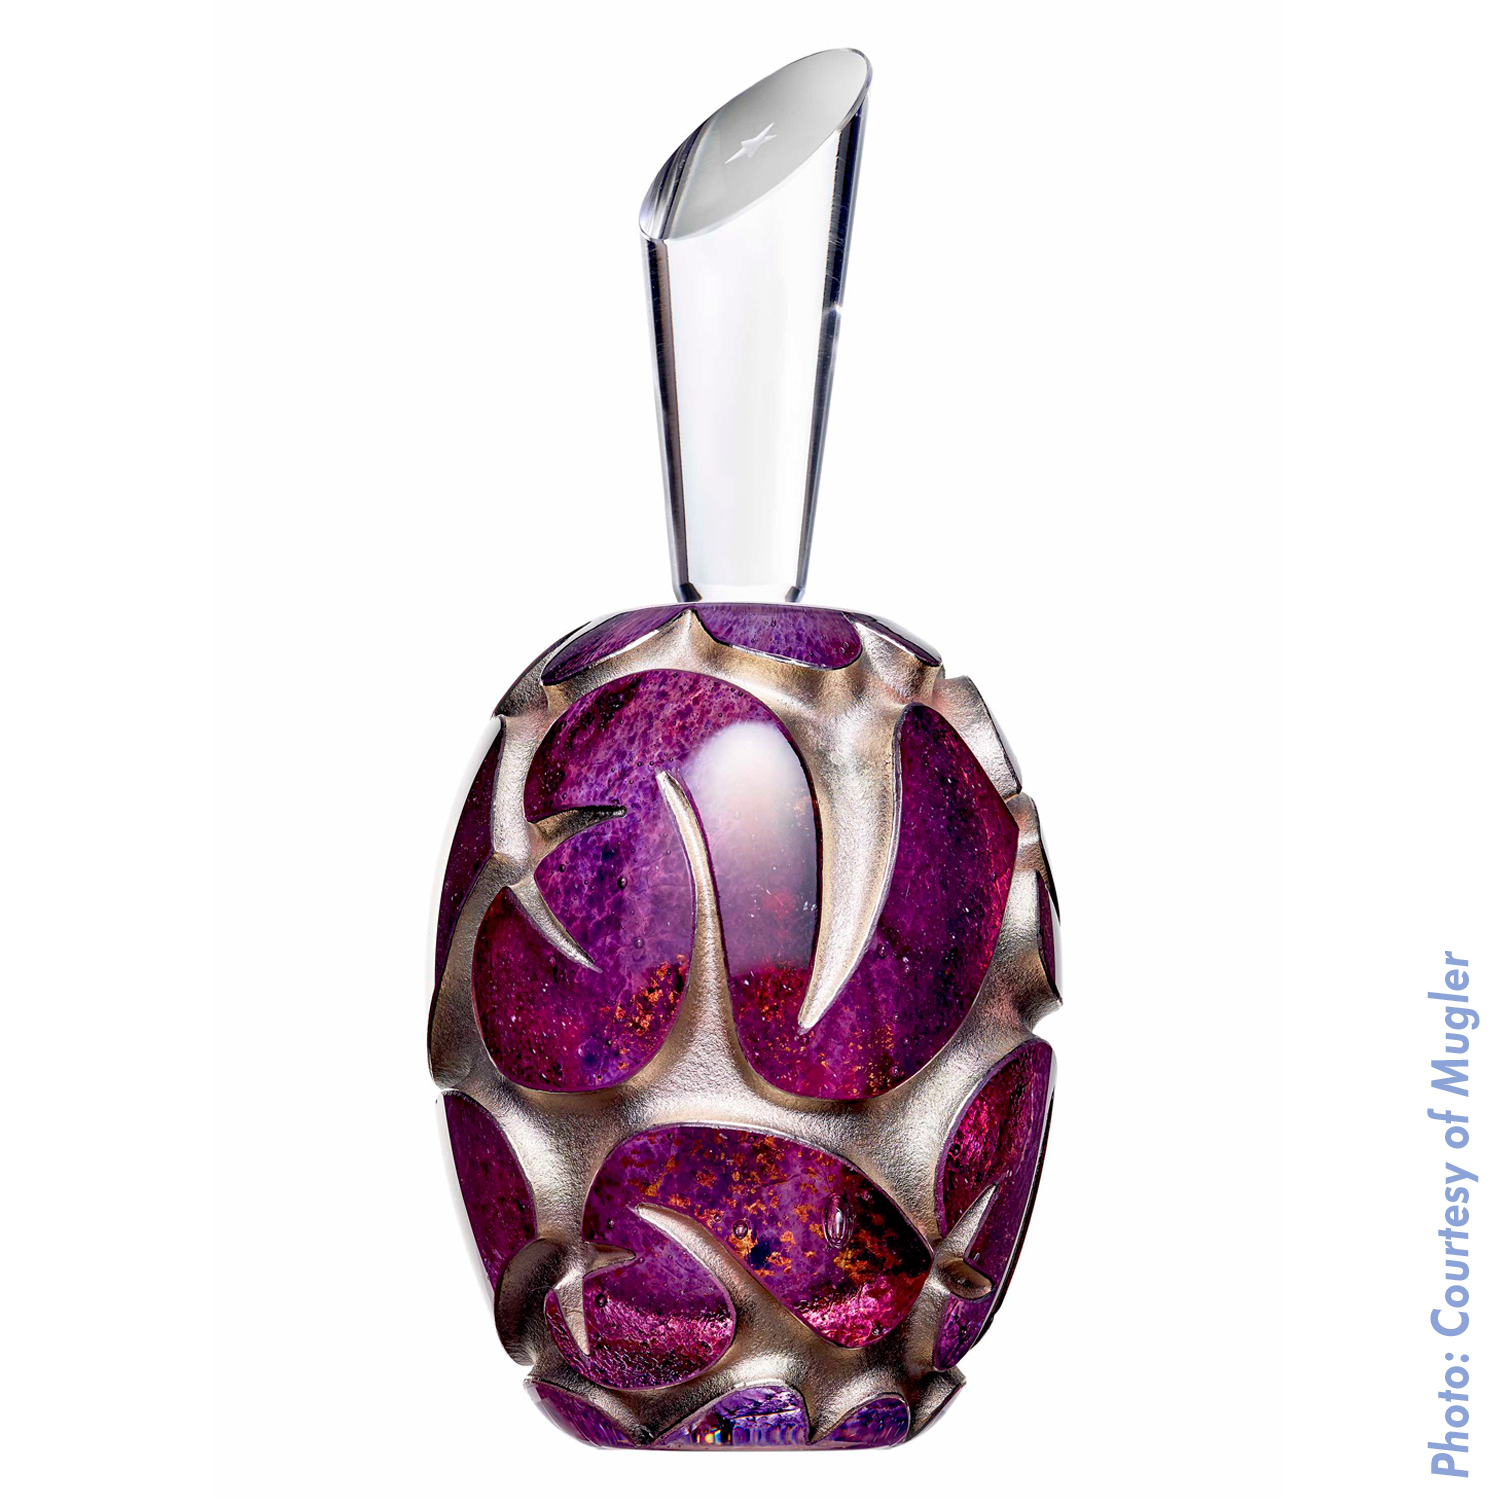 Thierry Mugler Angel Perfume Collector's Limited Edition Bottle 2018 2017 Clouds Cloud Egg Eggs Nuages Unique Art hand Glass Mouthblown Jean-Jacques Urcun Frederic Alary Purple thorns swirl